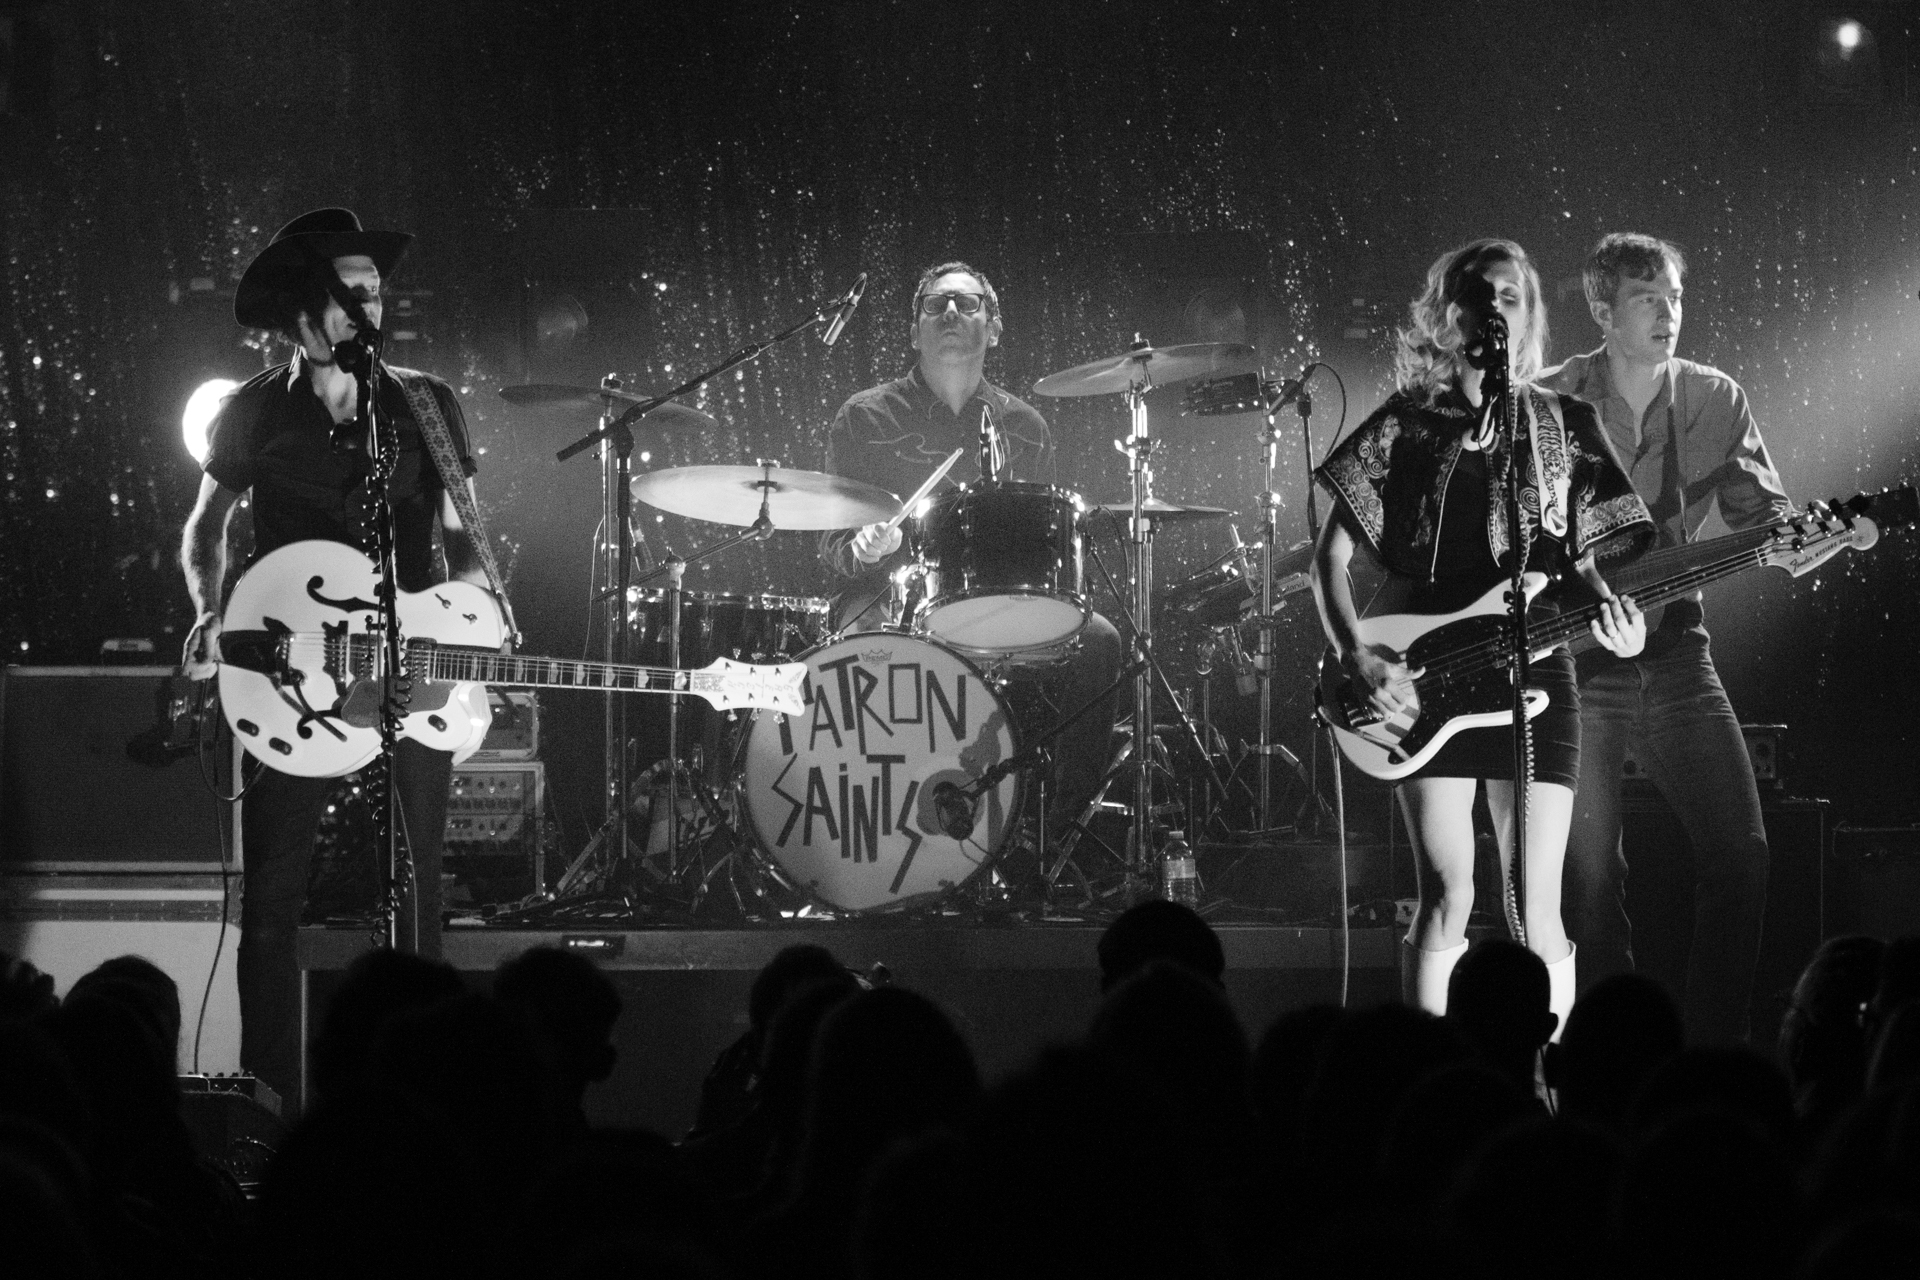 Whitehorse band members create a timeless tableau on stage in a black and white photo. Luke Doucet on the left strums an acoustic guitar, Melissa McClelland on the right wields an electric guitar, while a drummer holds the center stage. In the background, another band member plays a guitar, capturing the collaborative and harmonious essence of their musical performance.